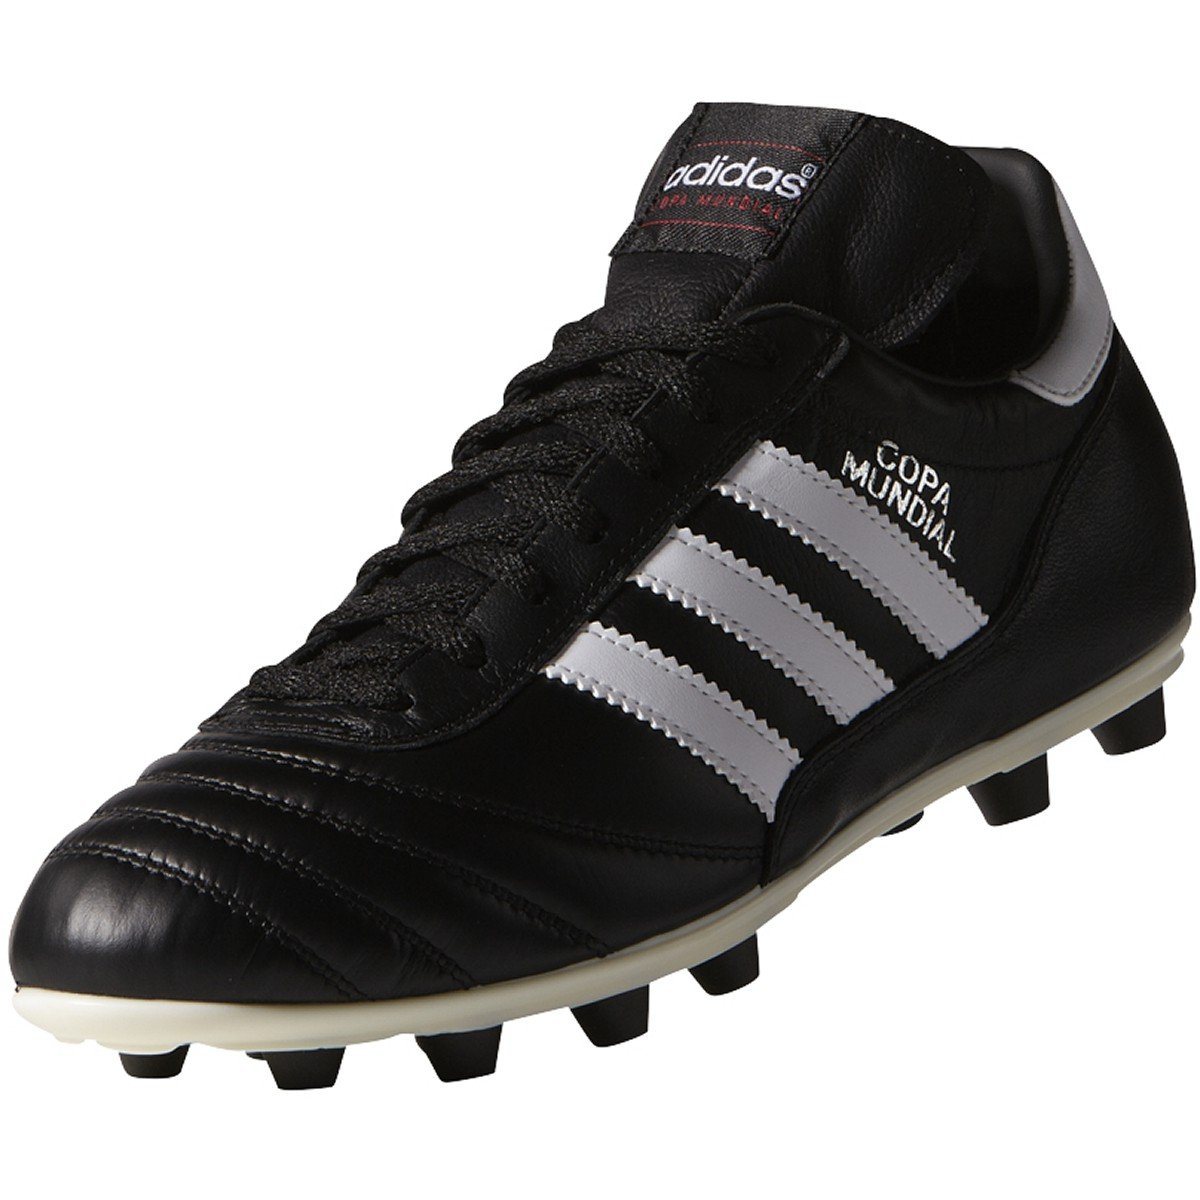 Adidas Copa Mundial Leather FG Soccer Cleats |